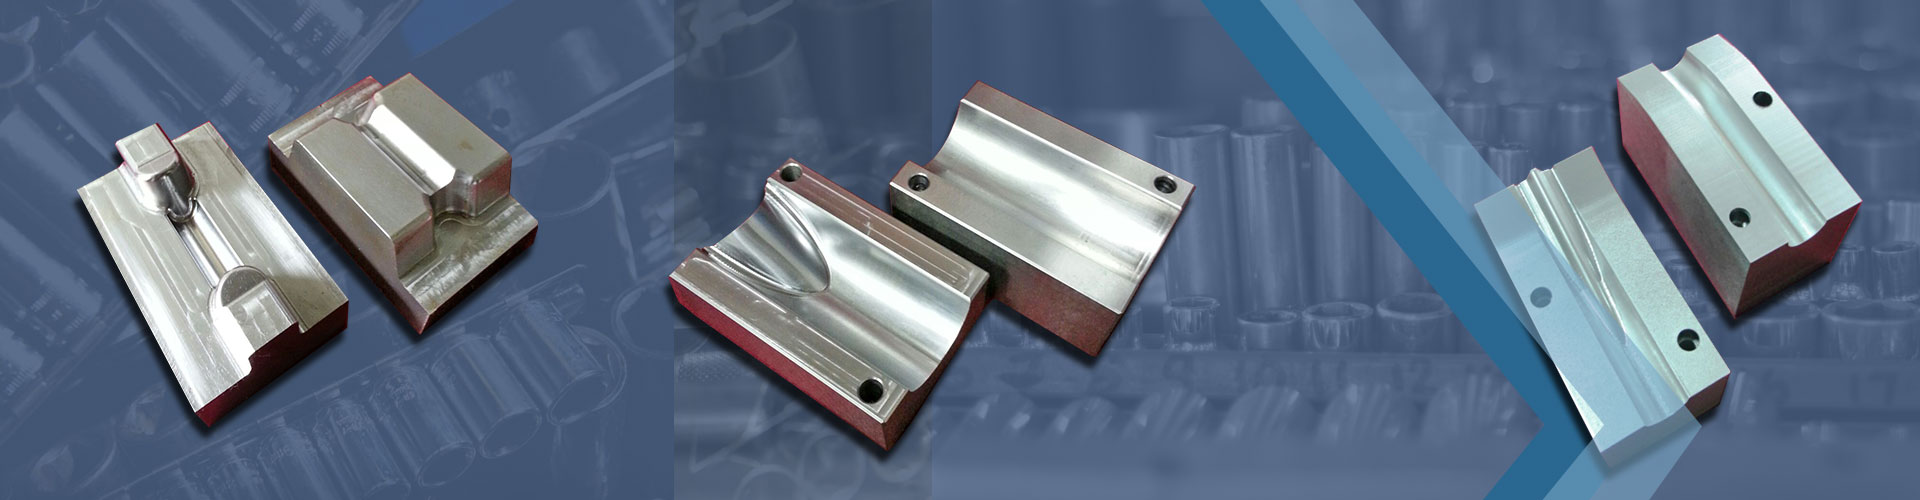 PLASTIC INJECTION MOLDS, DIE CASTING DIES AND SHEET METAL PRESS TOOLS